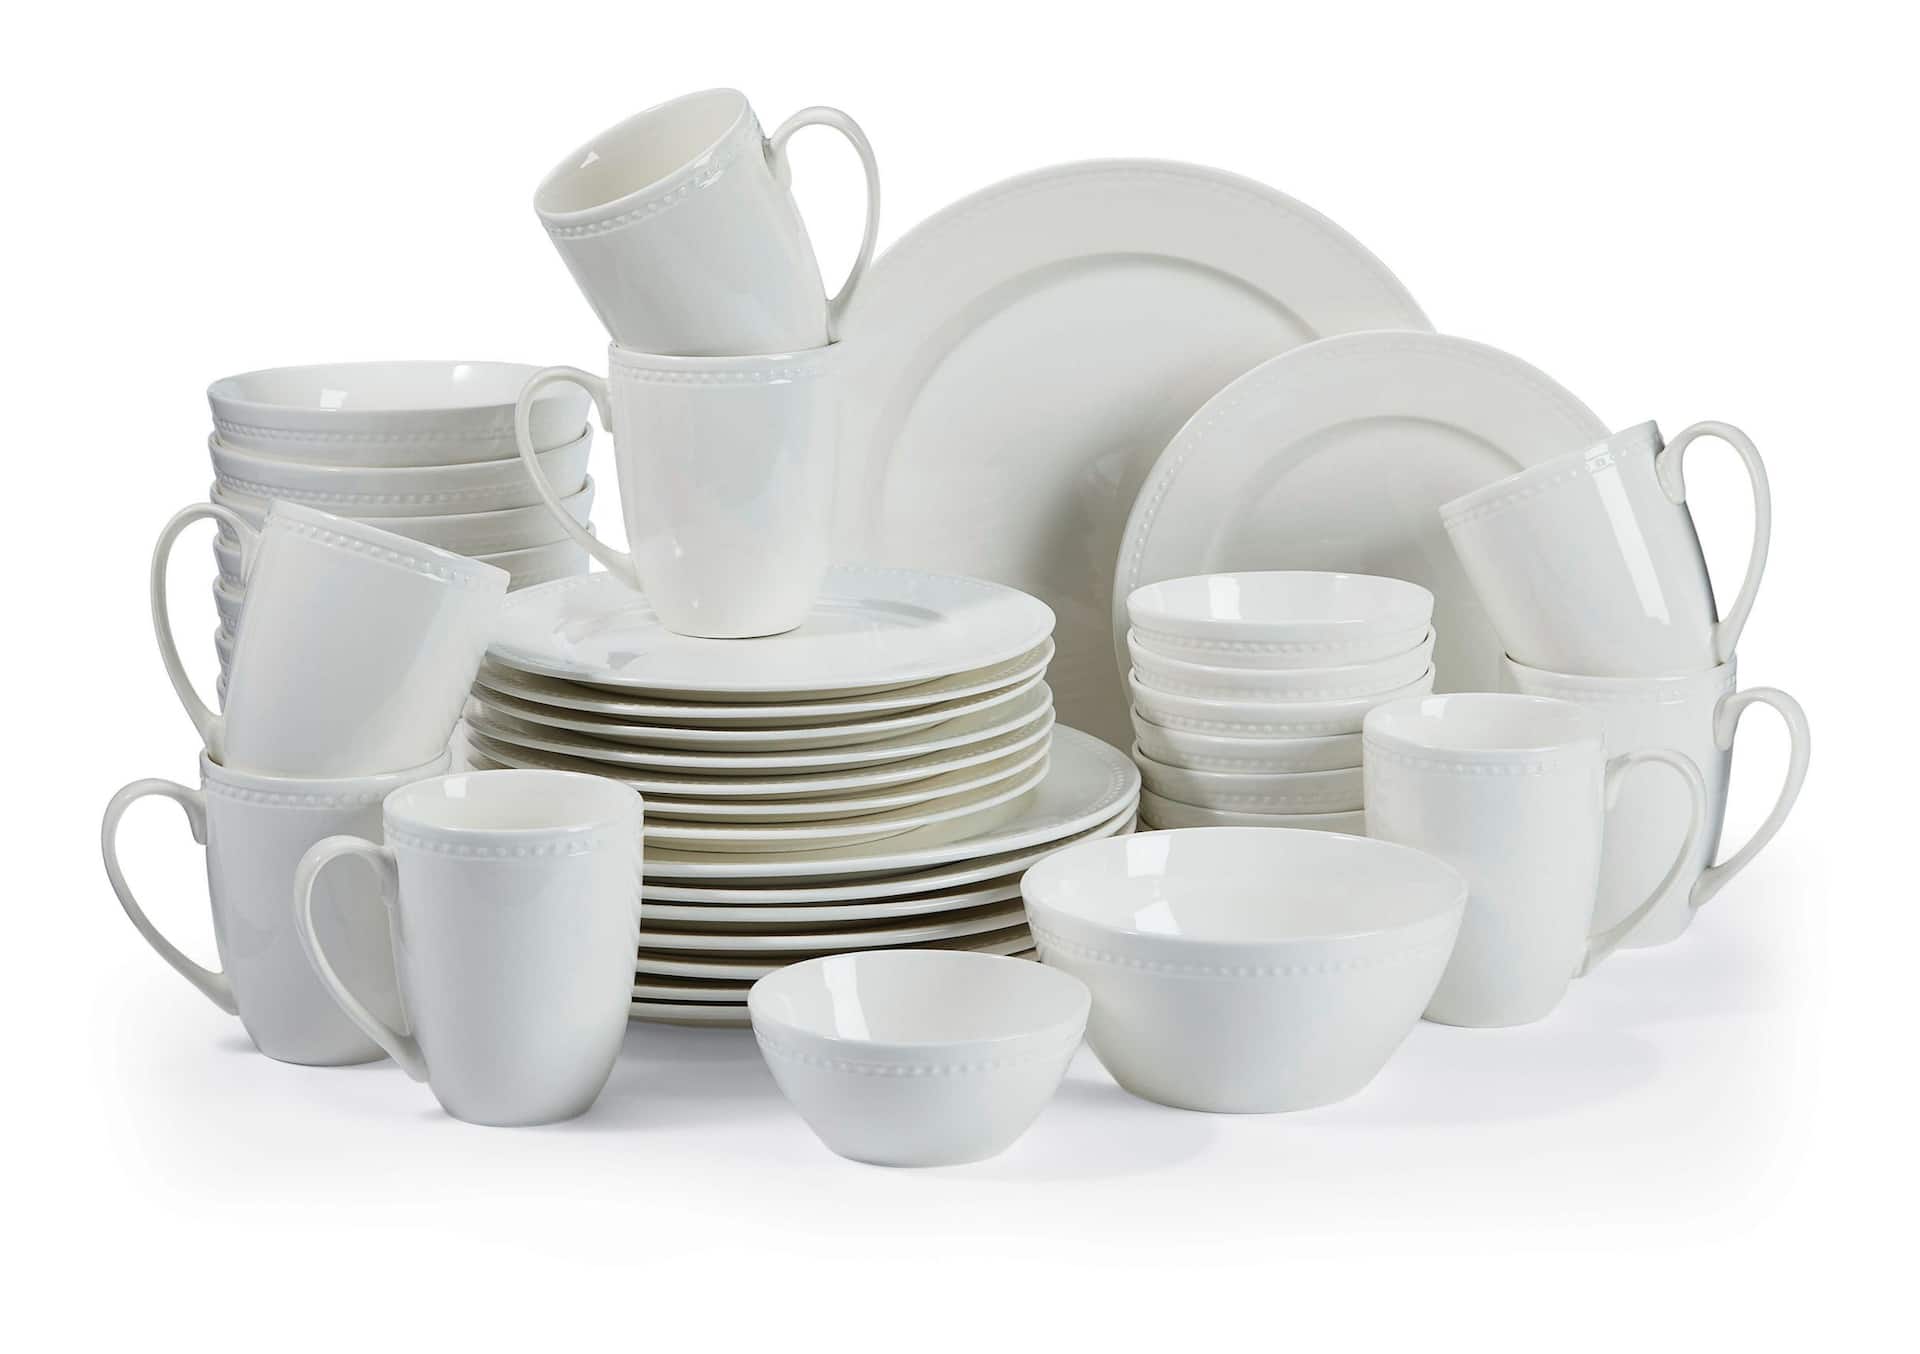 https://media-www.canadiantire.ca/product/living/kitchen/dining-and-entertaining/1424852/canvas-cordova-dinnerware-set-40-pc-w-fruit-bowl-a8420d7c-f612-4f5a-93bc-f9a34279e866-jpgrendition.jpg